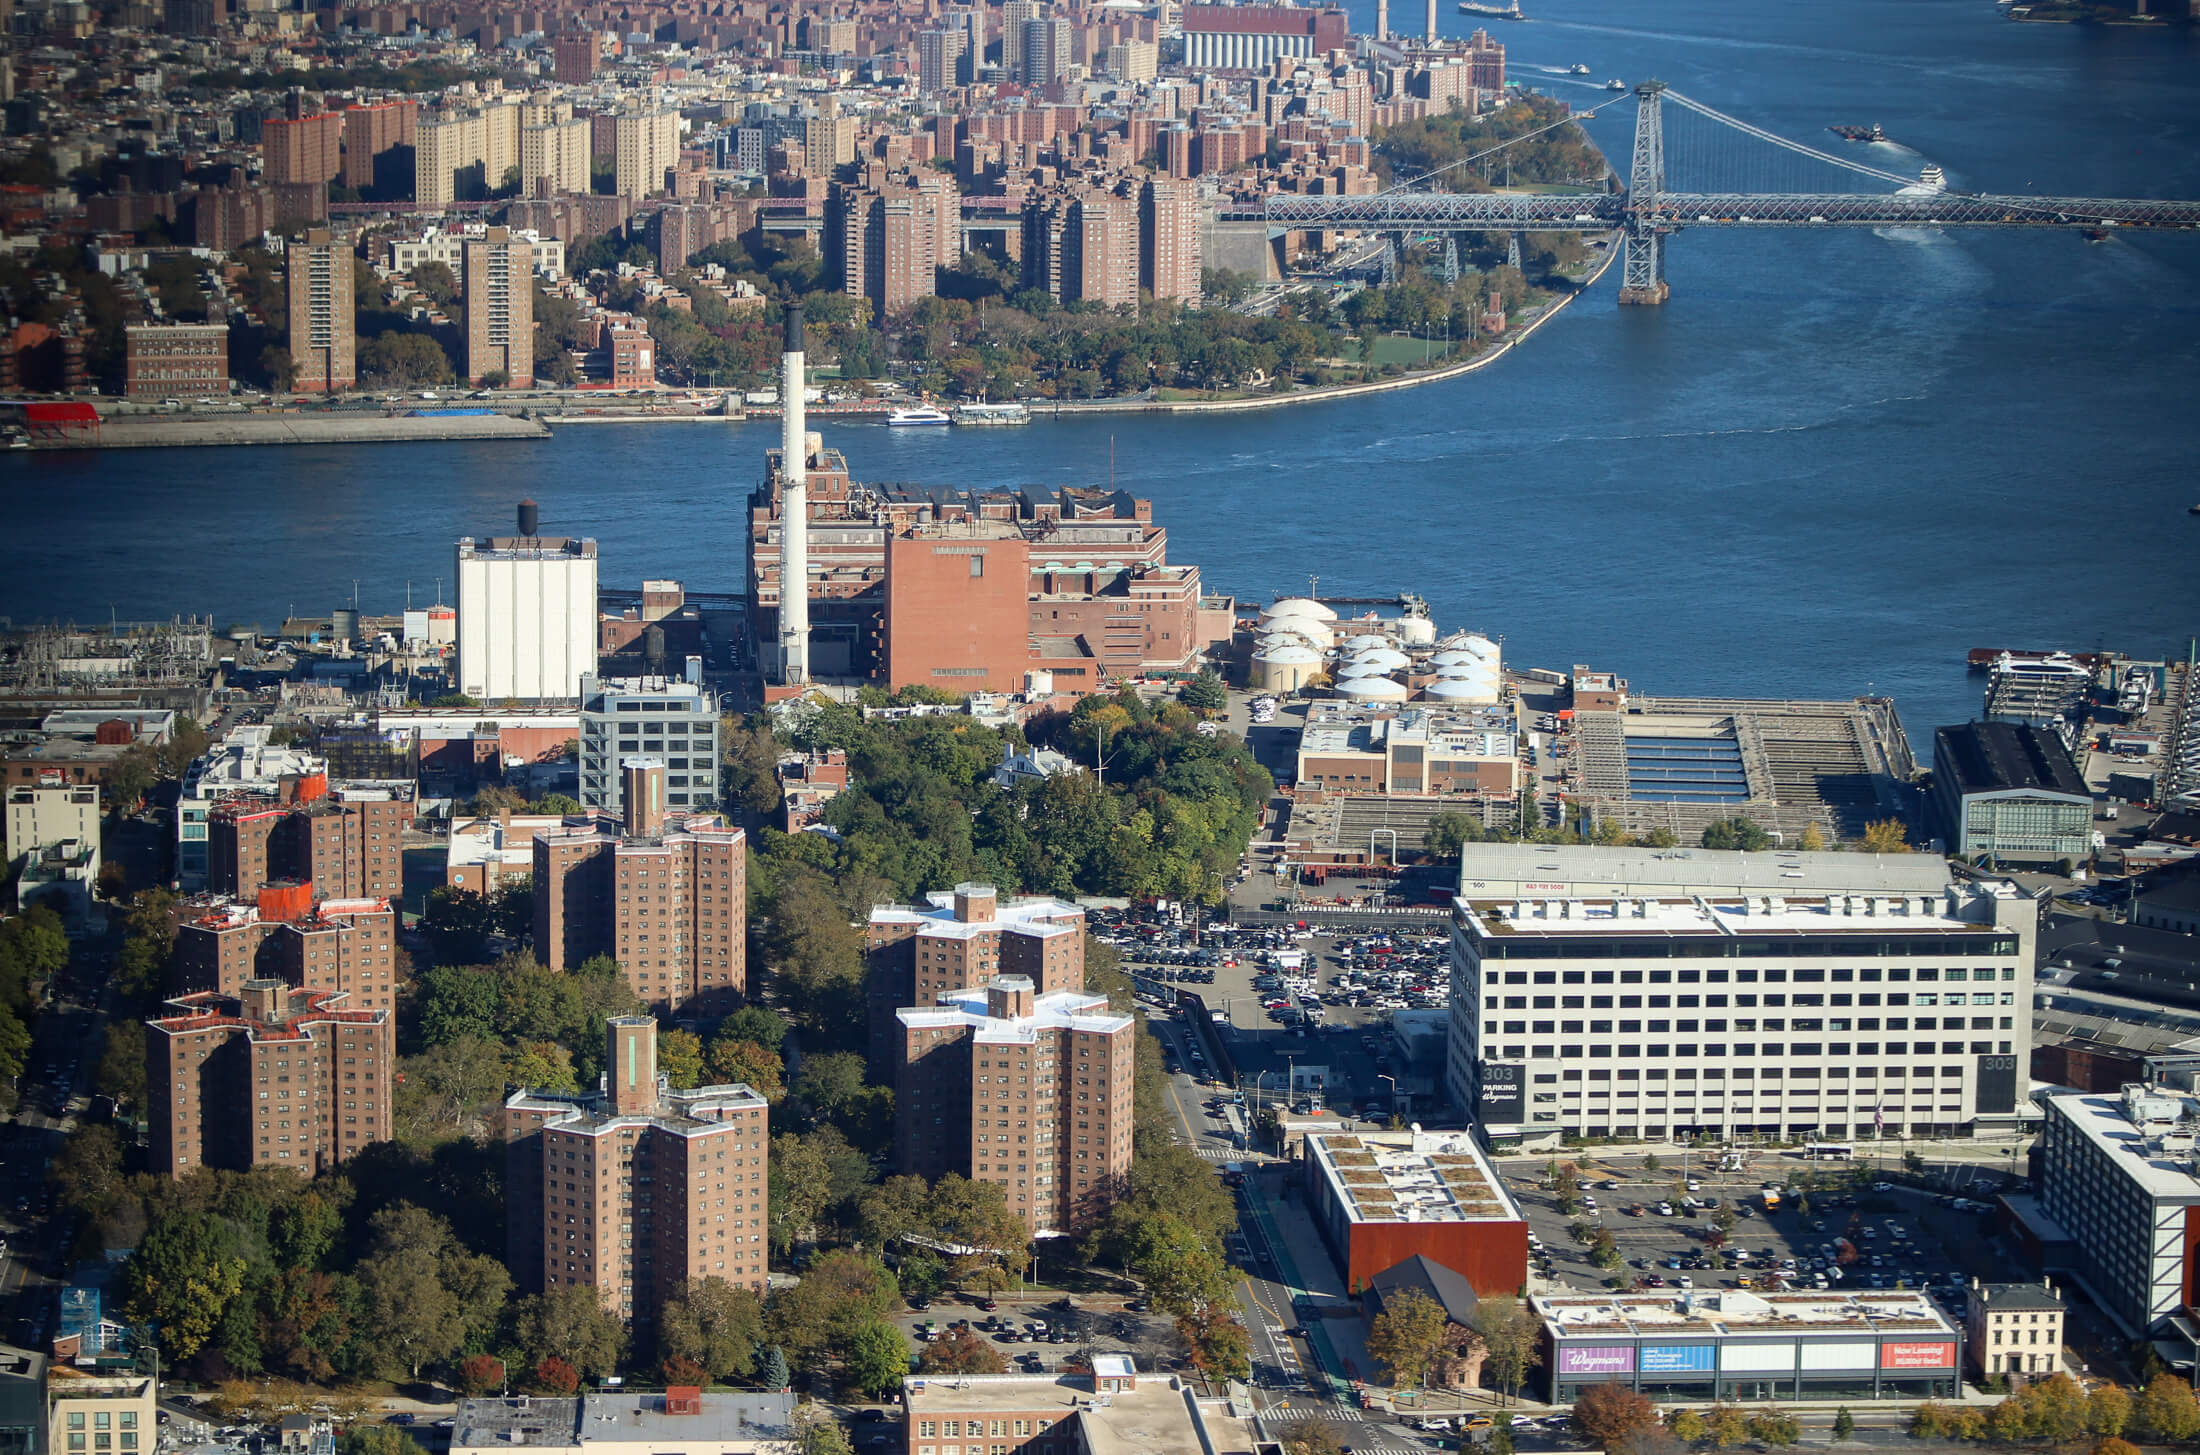 nycha - a waterfront aerial view showing the farragut houses and nycha housing in manhattan